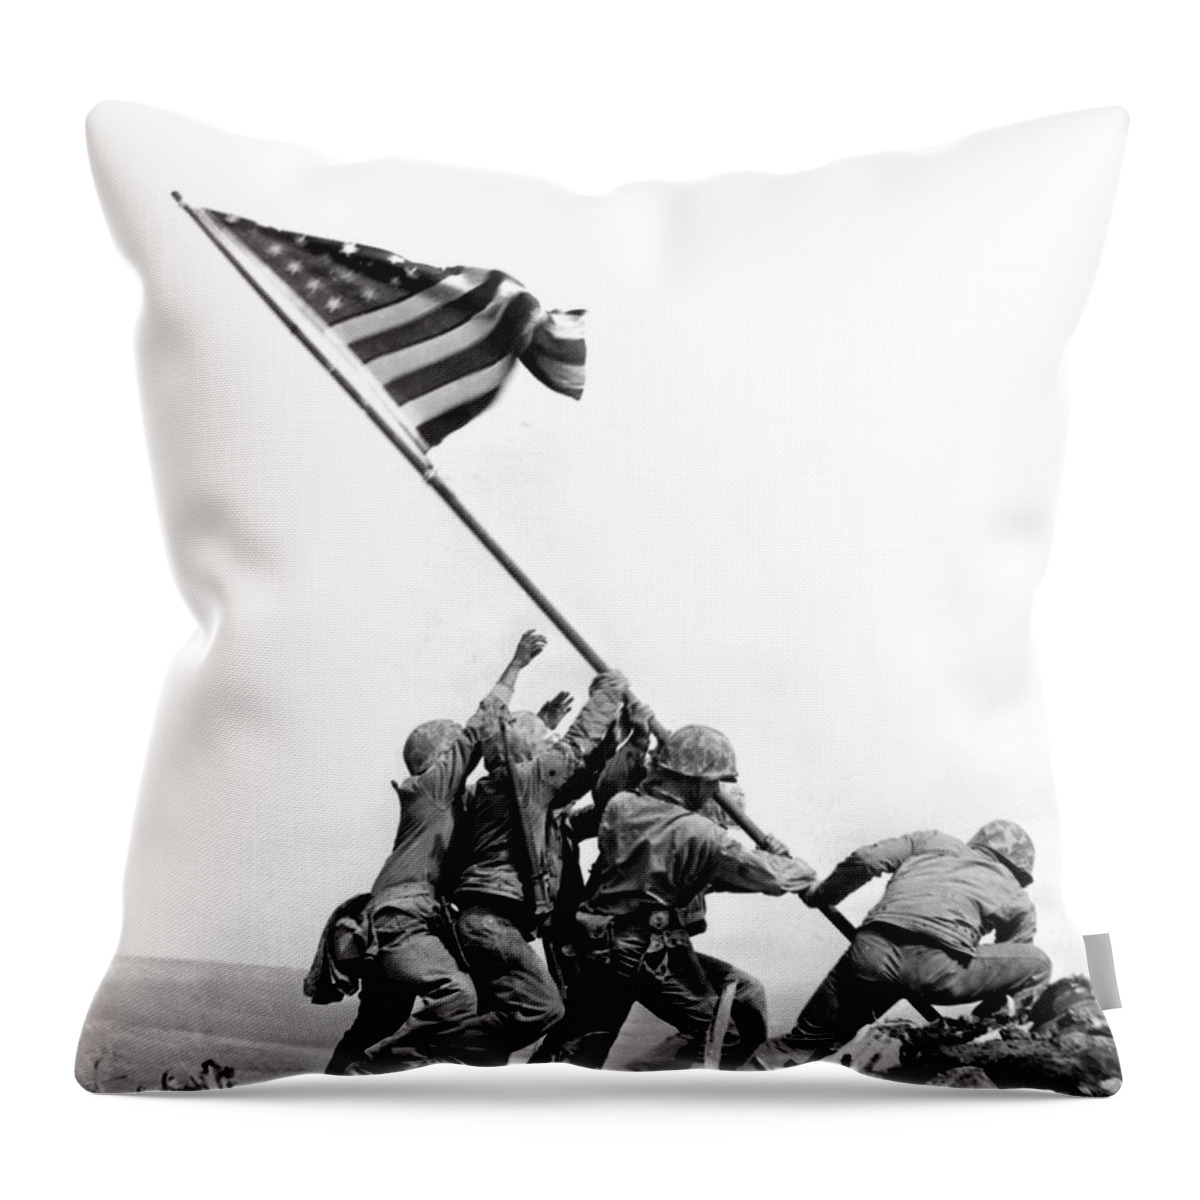 #faatoppicks Throw Pillow featuring the photograph Flag Raising At Iwo Jima by Underwood Archives